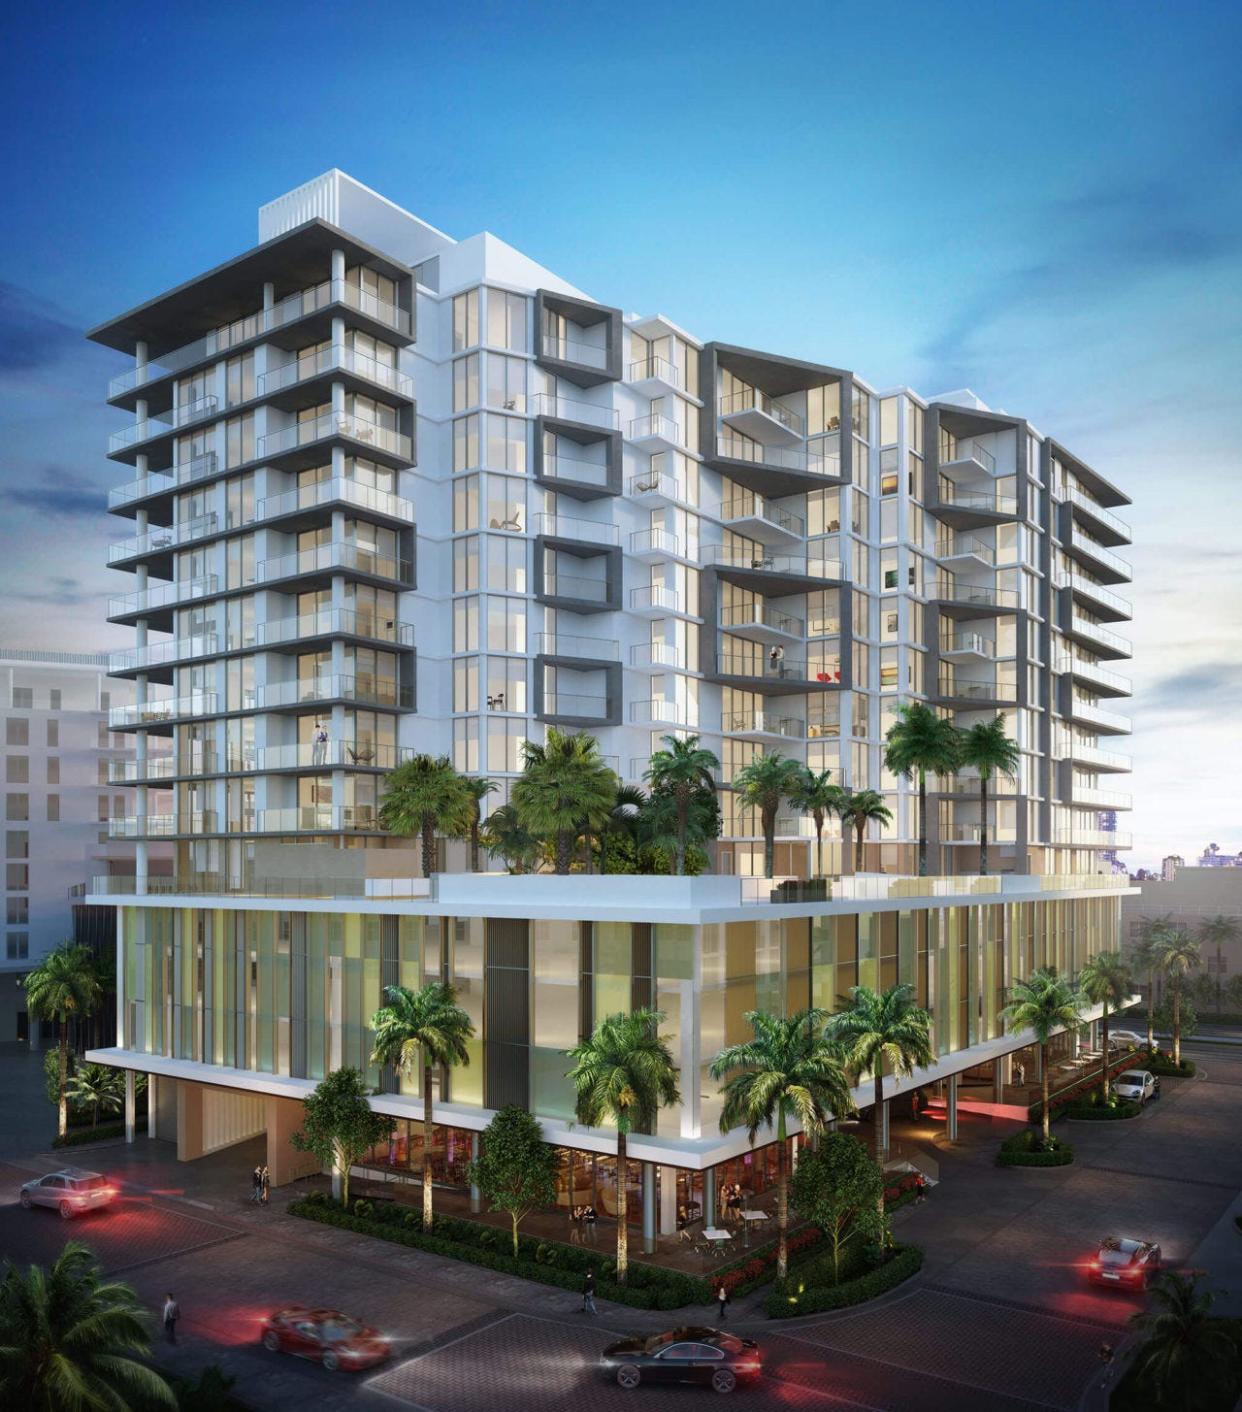 The 15-story Aura at Metropolitan Naples will feature only 56 luxury residences offering incredible views of Naples Bay, downtown Naples and the Gulf of Mexico.